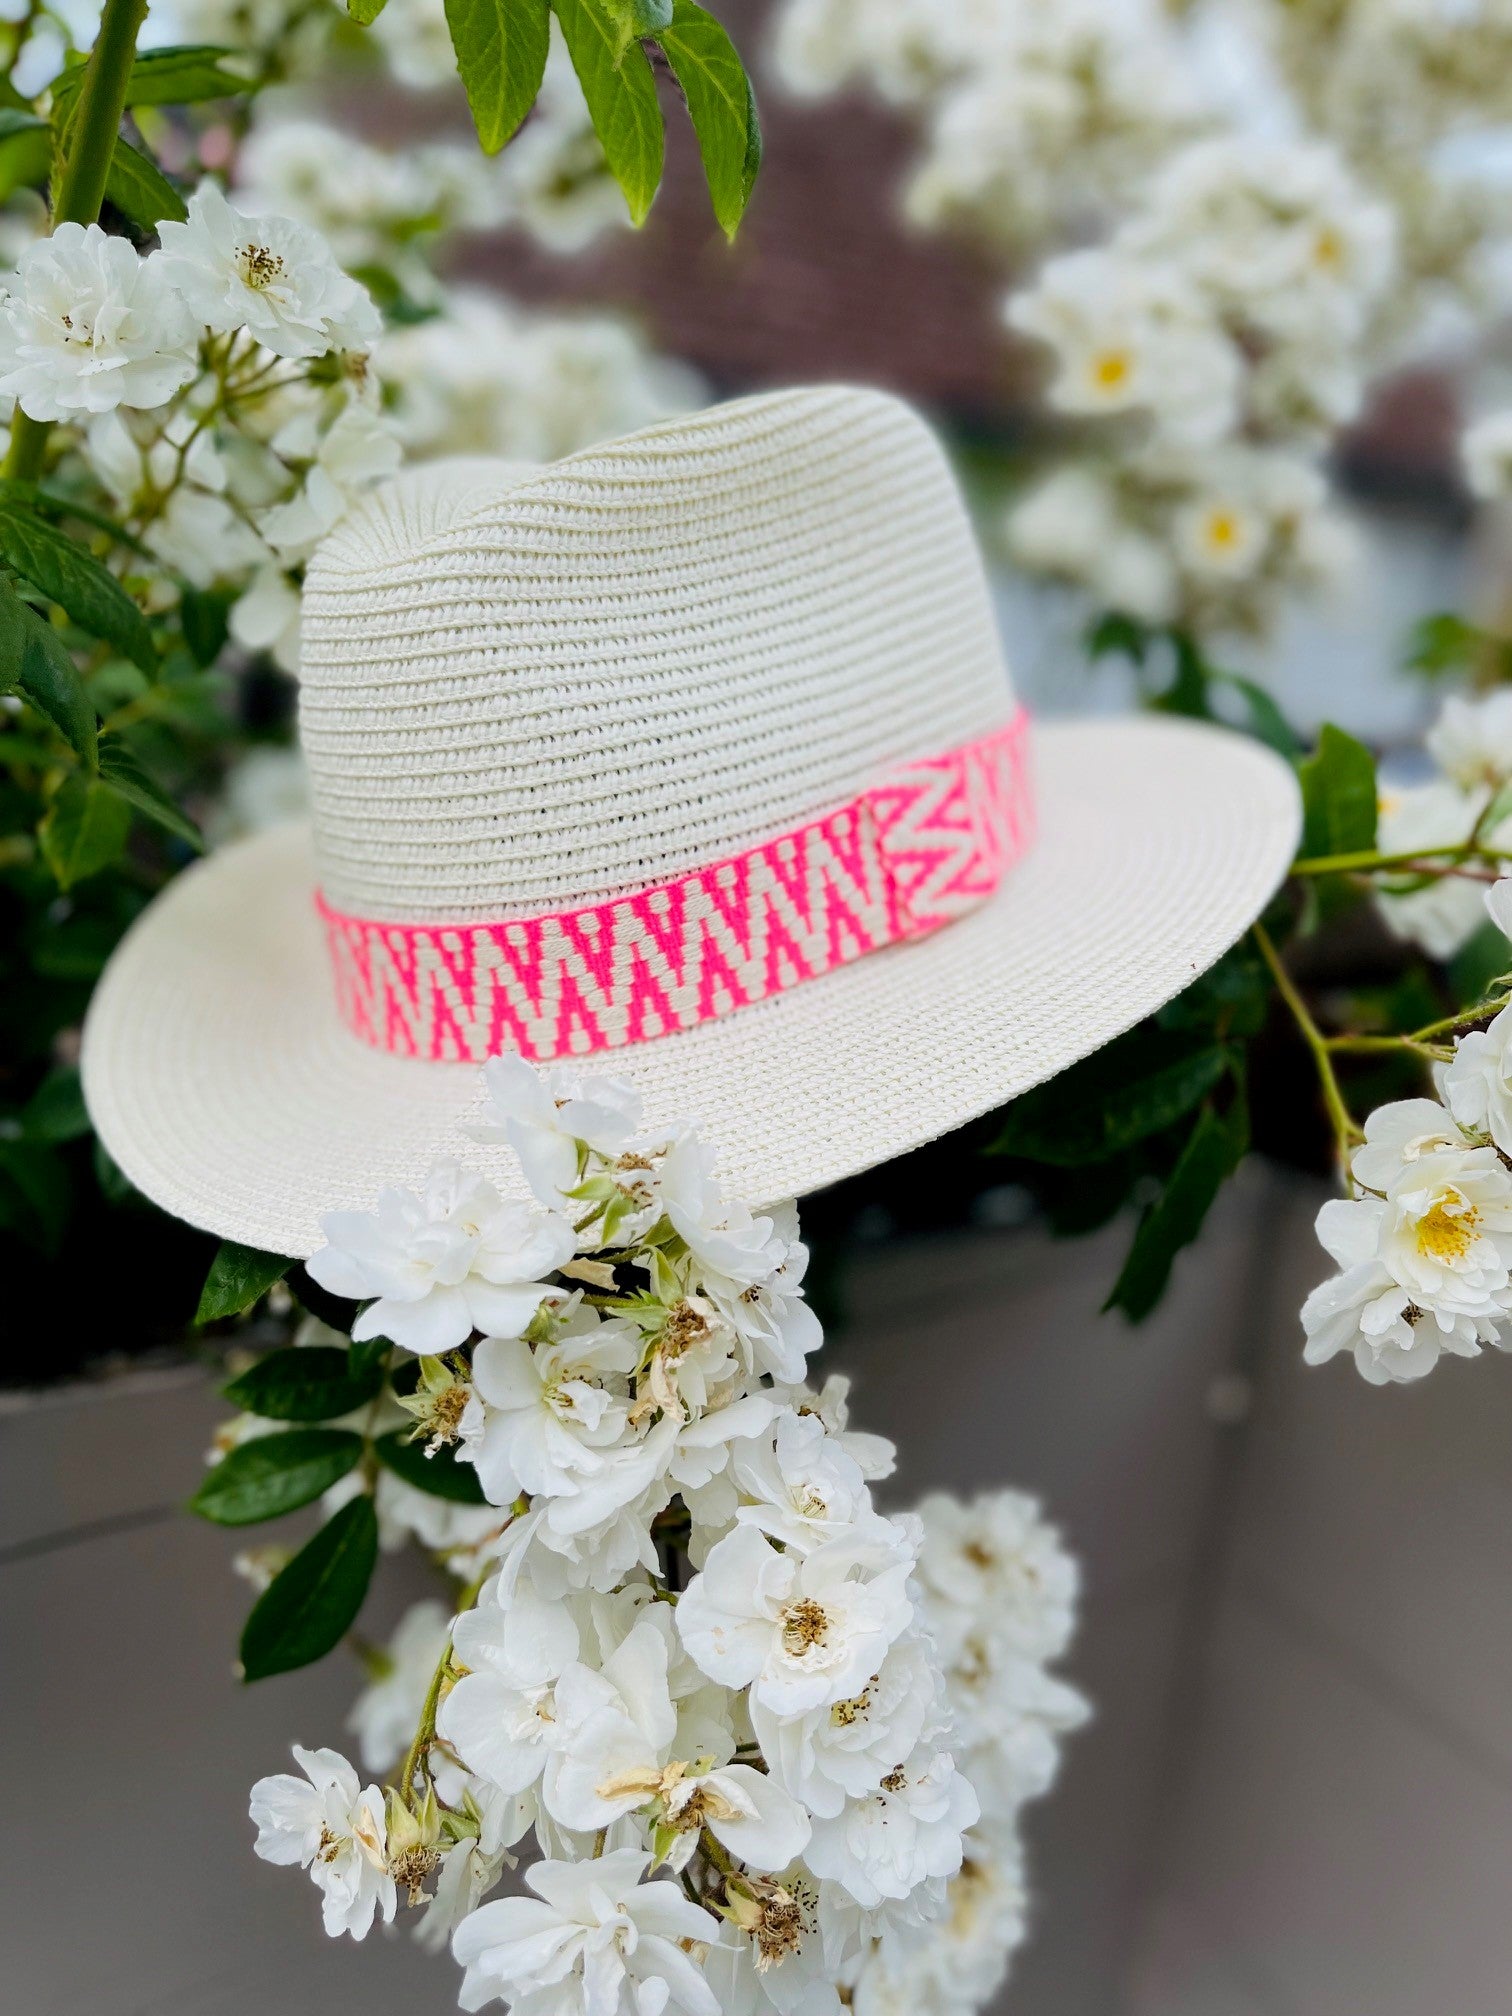 Summer straw fedora with neon pink band